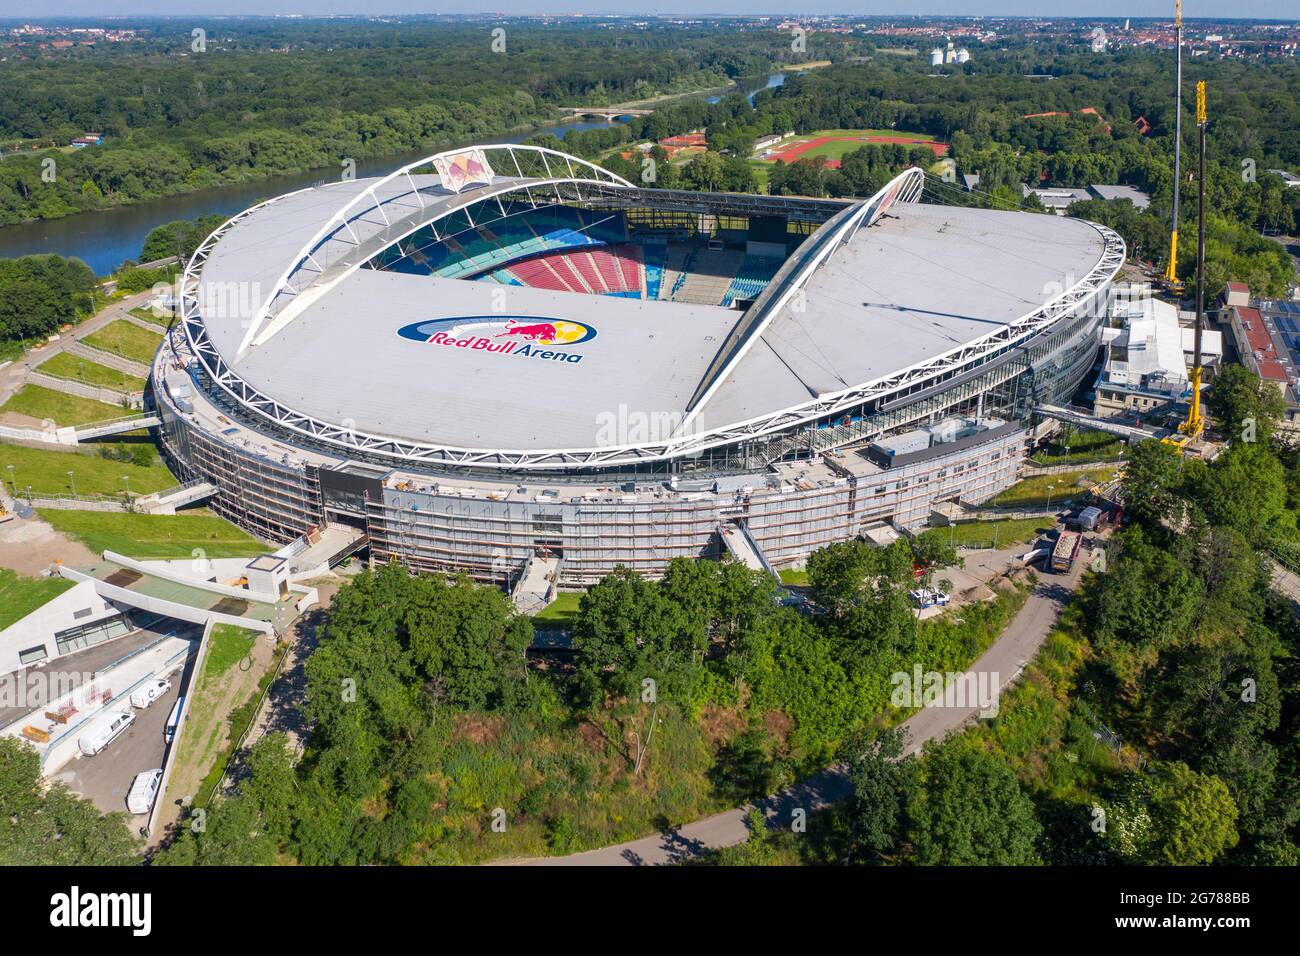 14 June 2021, Saxony, Leipzig: Two cranes stand at the Red Bull Arena. RB Leipzig's home ground is being rebuilt. The spectator capacity increases from 42,558 to 47,069 standing and seated. The outside of the stadium is enclosed with a soundproof facade. The embankment of the former Zentralstadion, which encompasses the arena, was cut open behind the historic bell tower to make room for a new entrance. RB Leipzig is investing a good 60 million euros in the conversion by 2022. (Aerial view with drone) Photo: Jan Woitas/dpa-Zentralbild/ZB - IMPORTANT NOTE: In accordance with the regulations of t Stock Photo